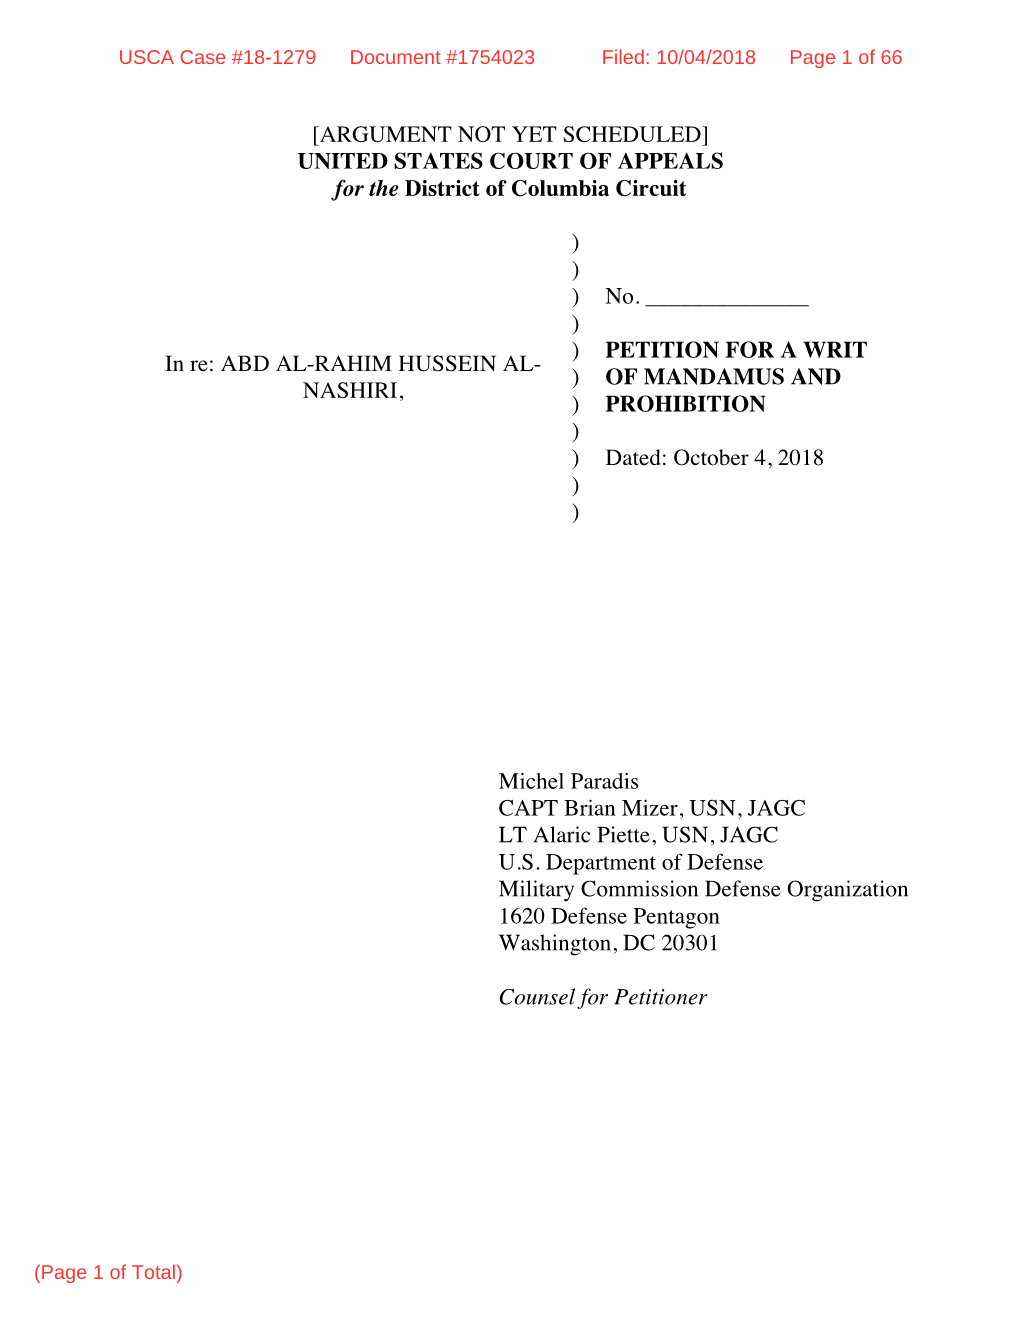 [ARGUMENT NOT YET SCHEDULED] UNITED STATES COURT of APPEALS for the District of Columbia Circuit